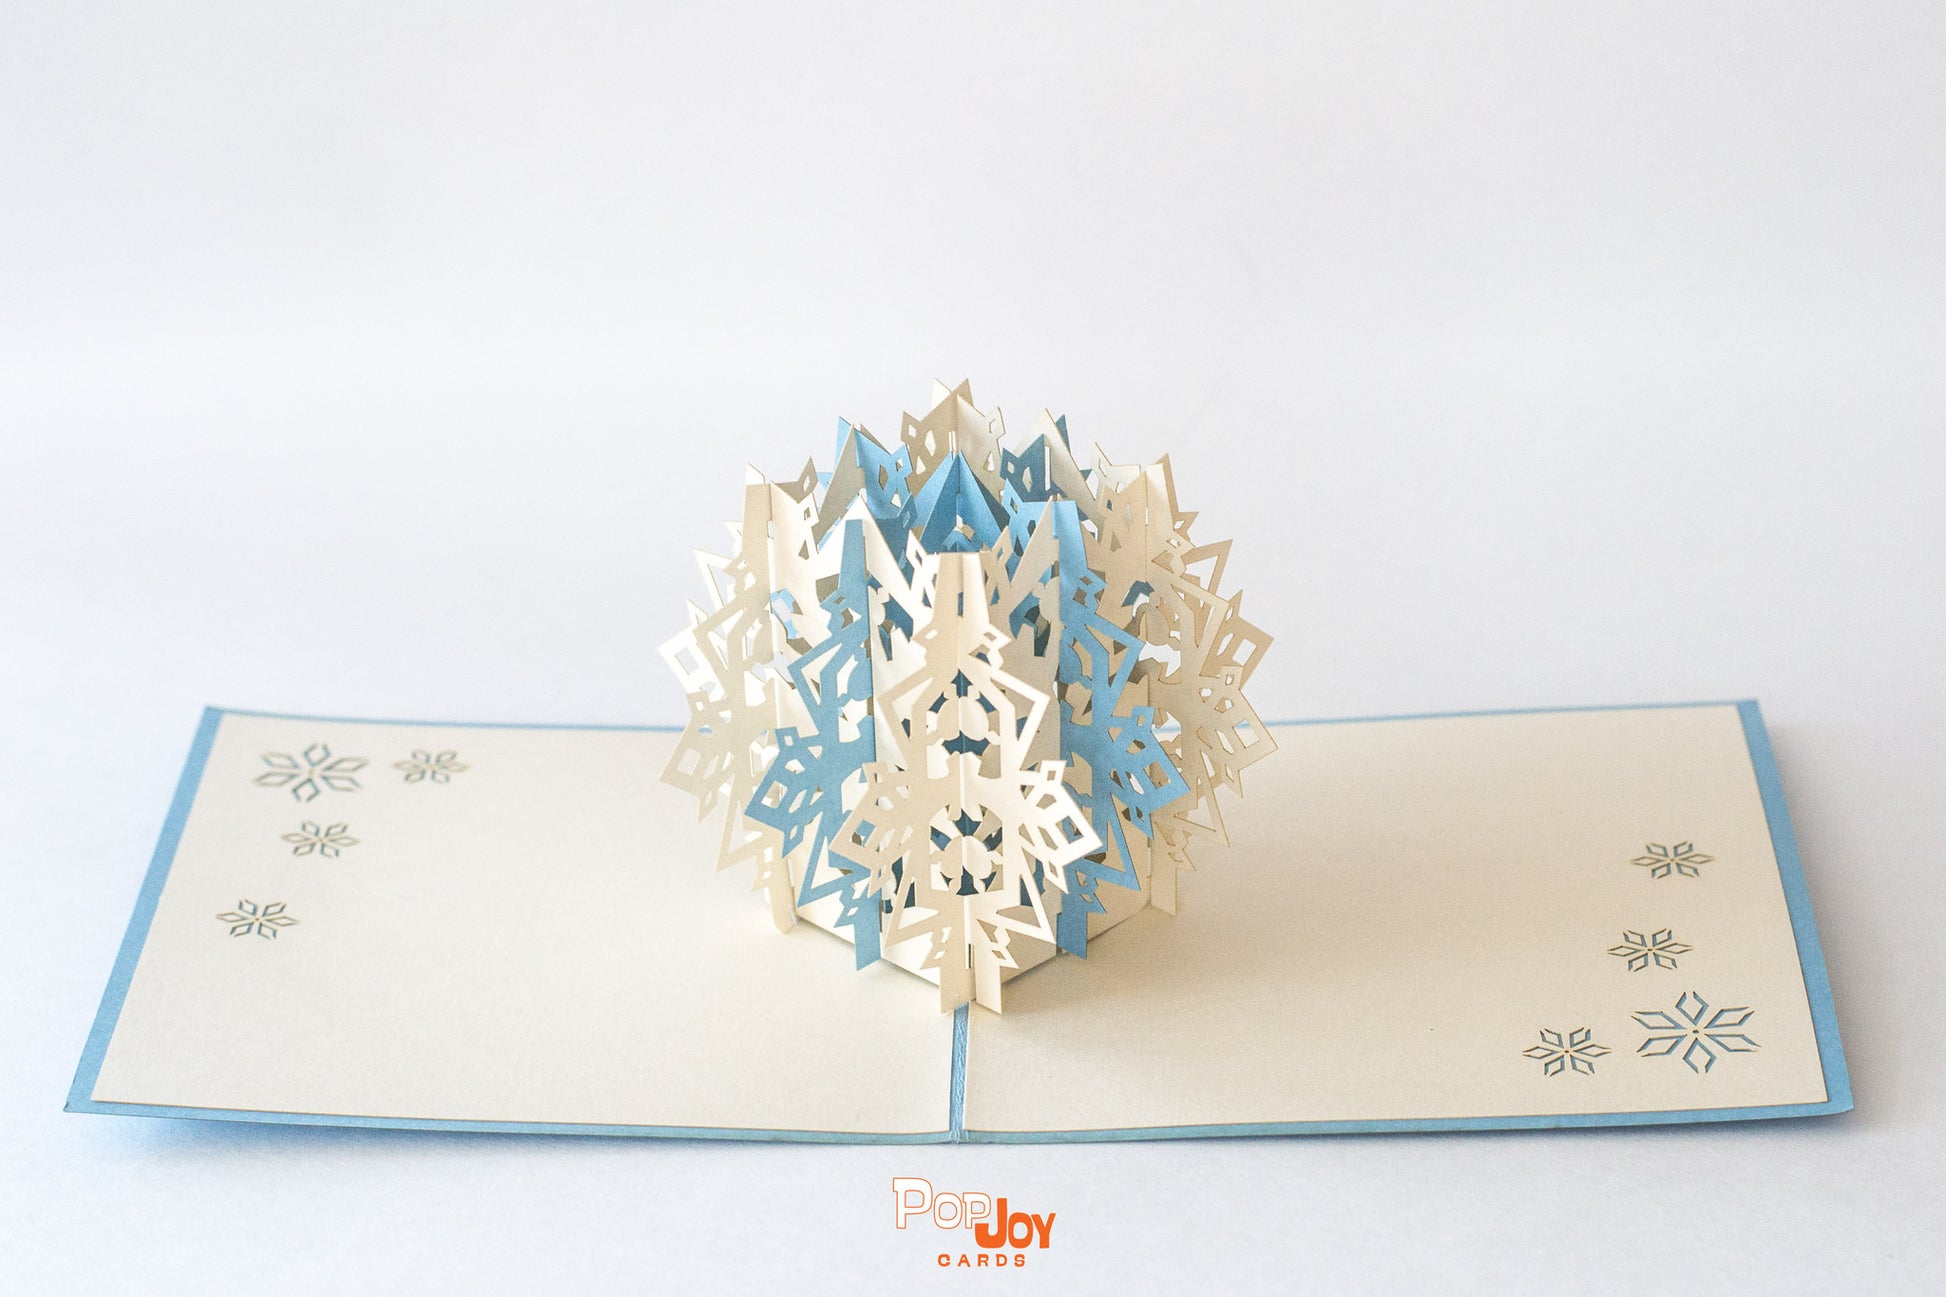 Pop-up card with intricate blue and white snowflake